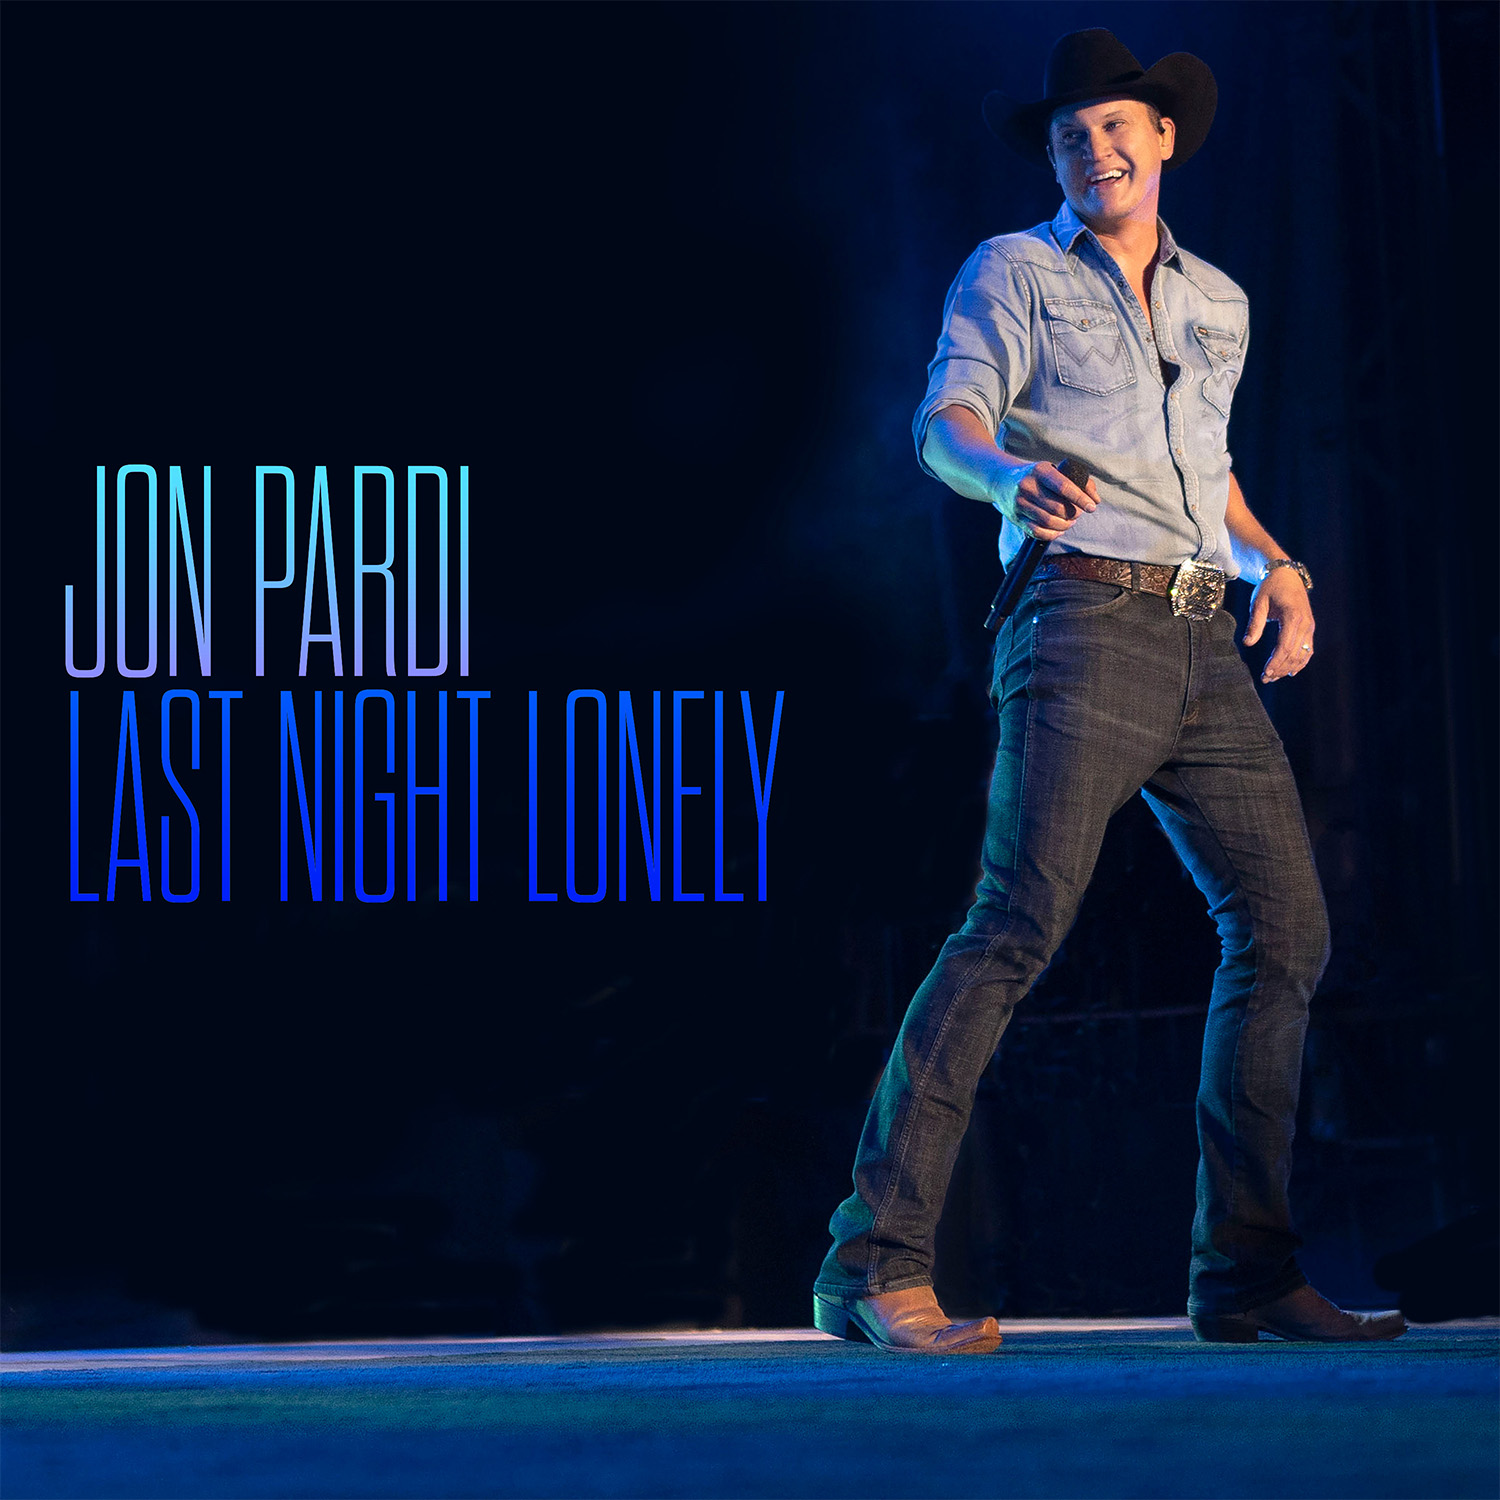 Jon Pardi's new song, "Last Night Lonely" is available now, February 17th